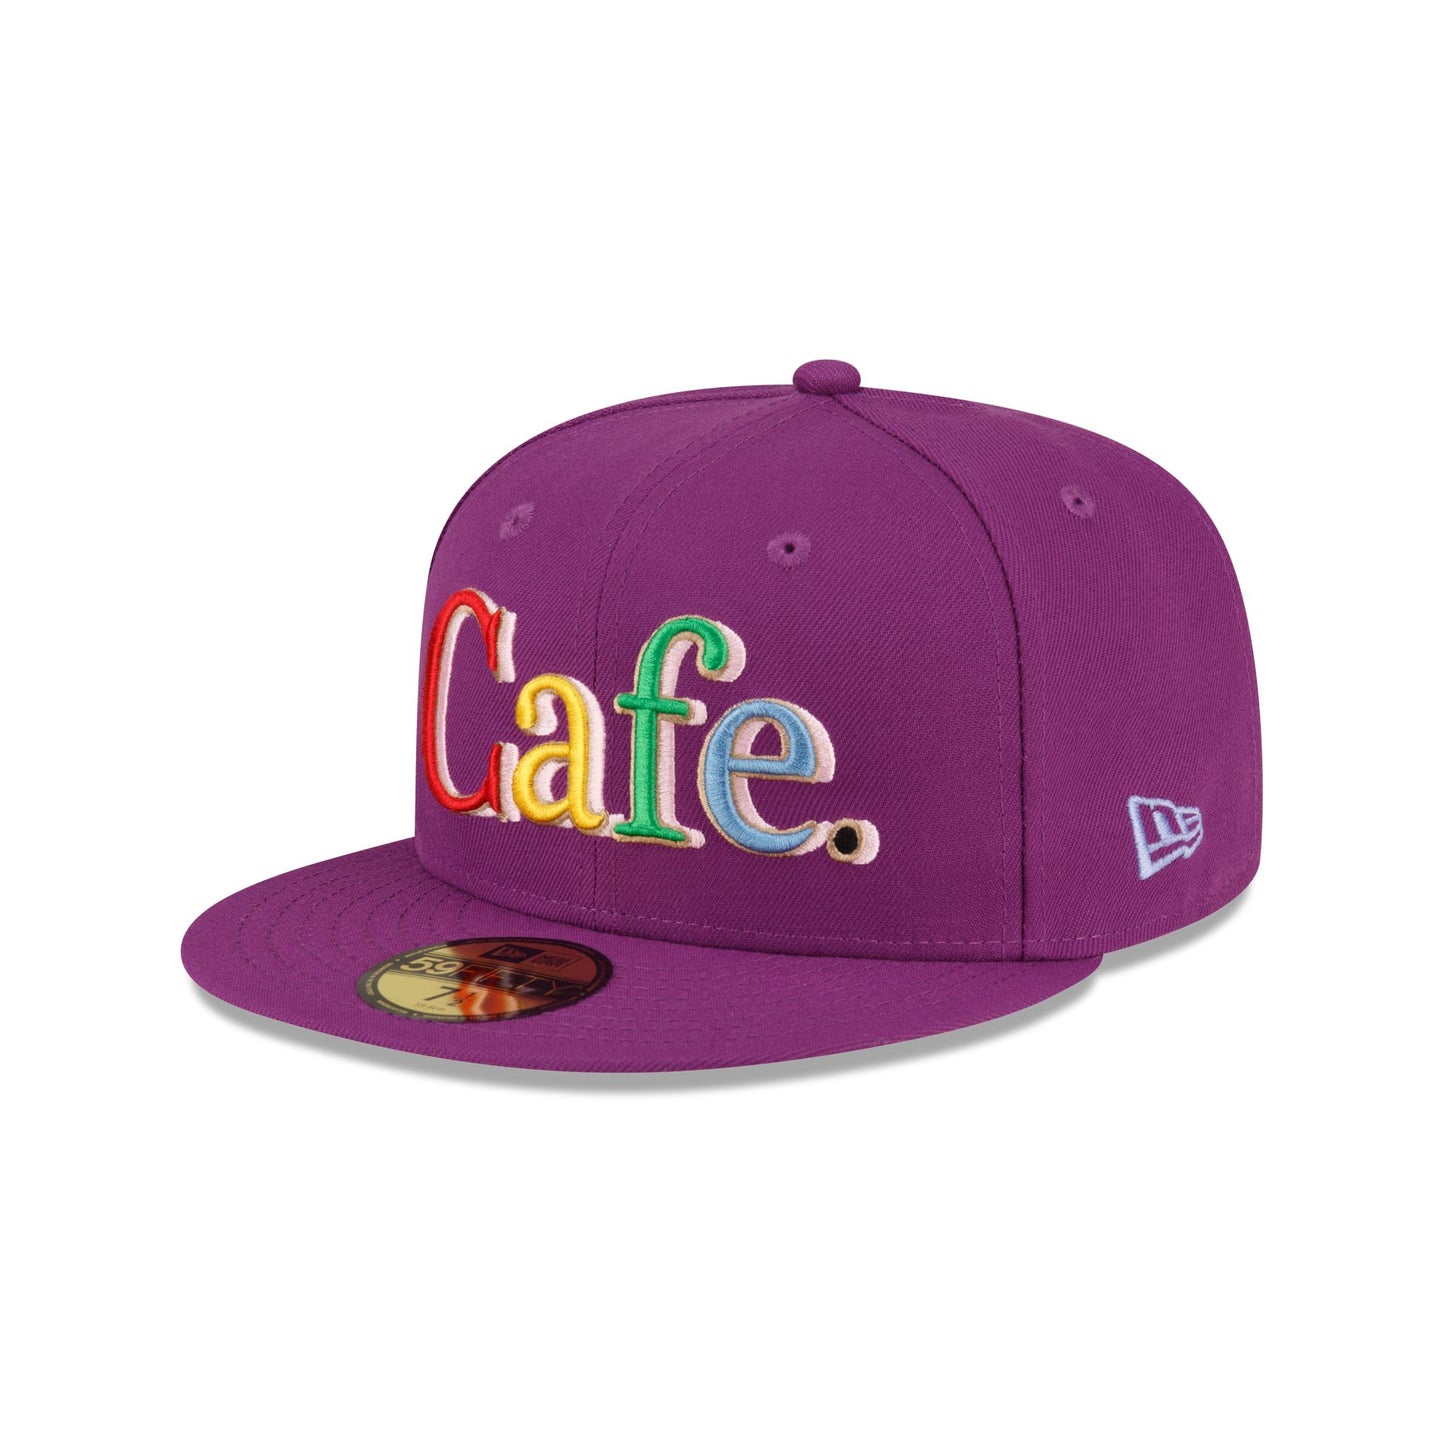 Cafe X New Era Purple 59FIFTY Fitted Hat